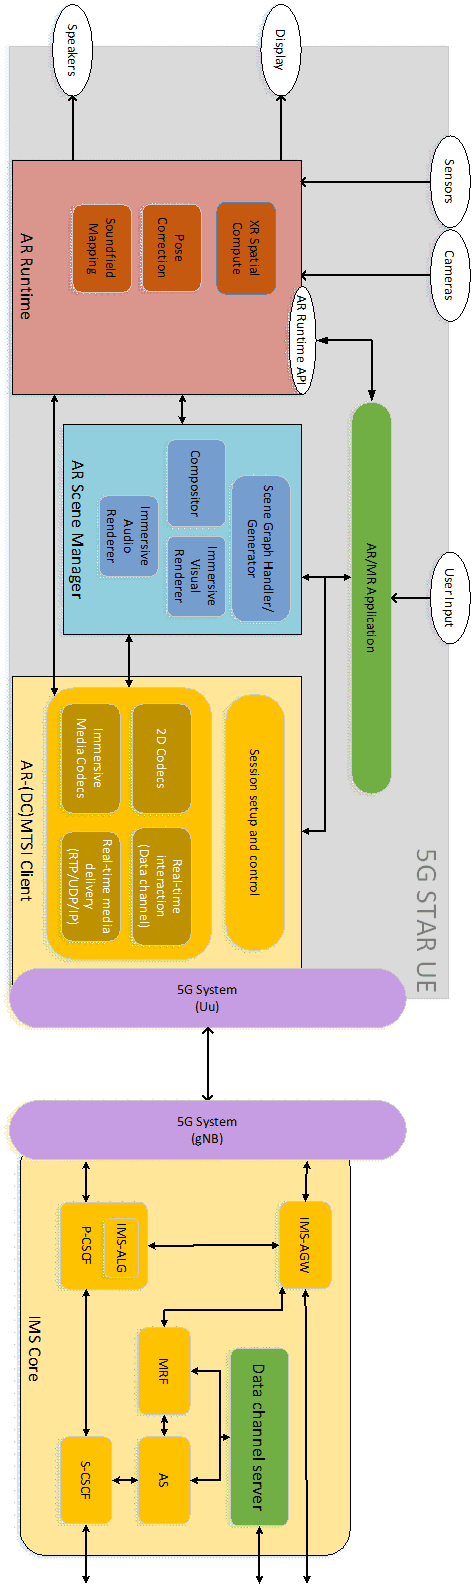 Copy of original 3GPP image for 3GPP TS 26.998, Fig. 6.5.4-1: MTSI-based conversational service architecture for STAR UE